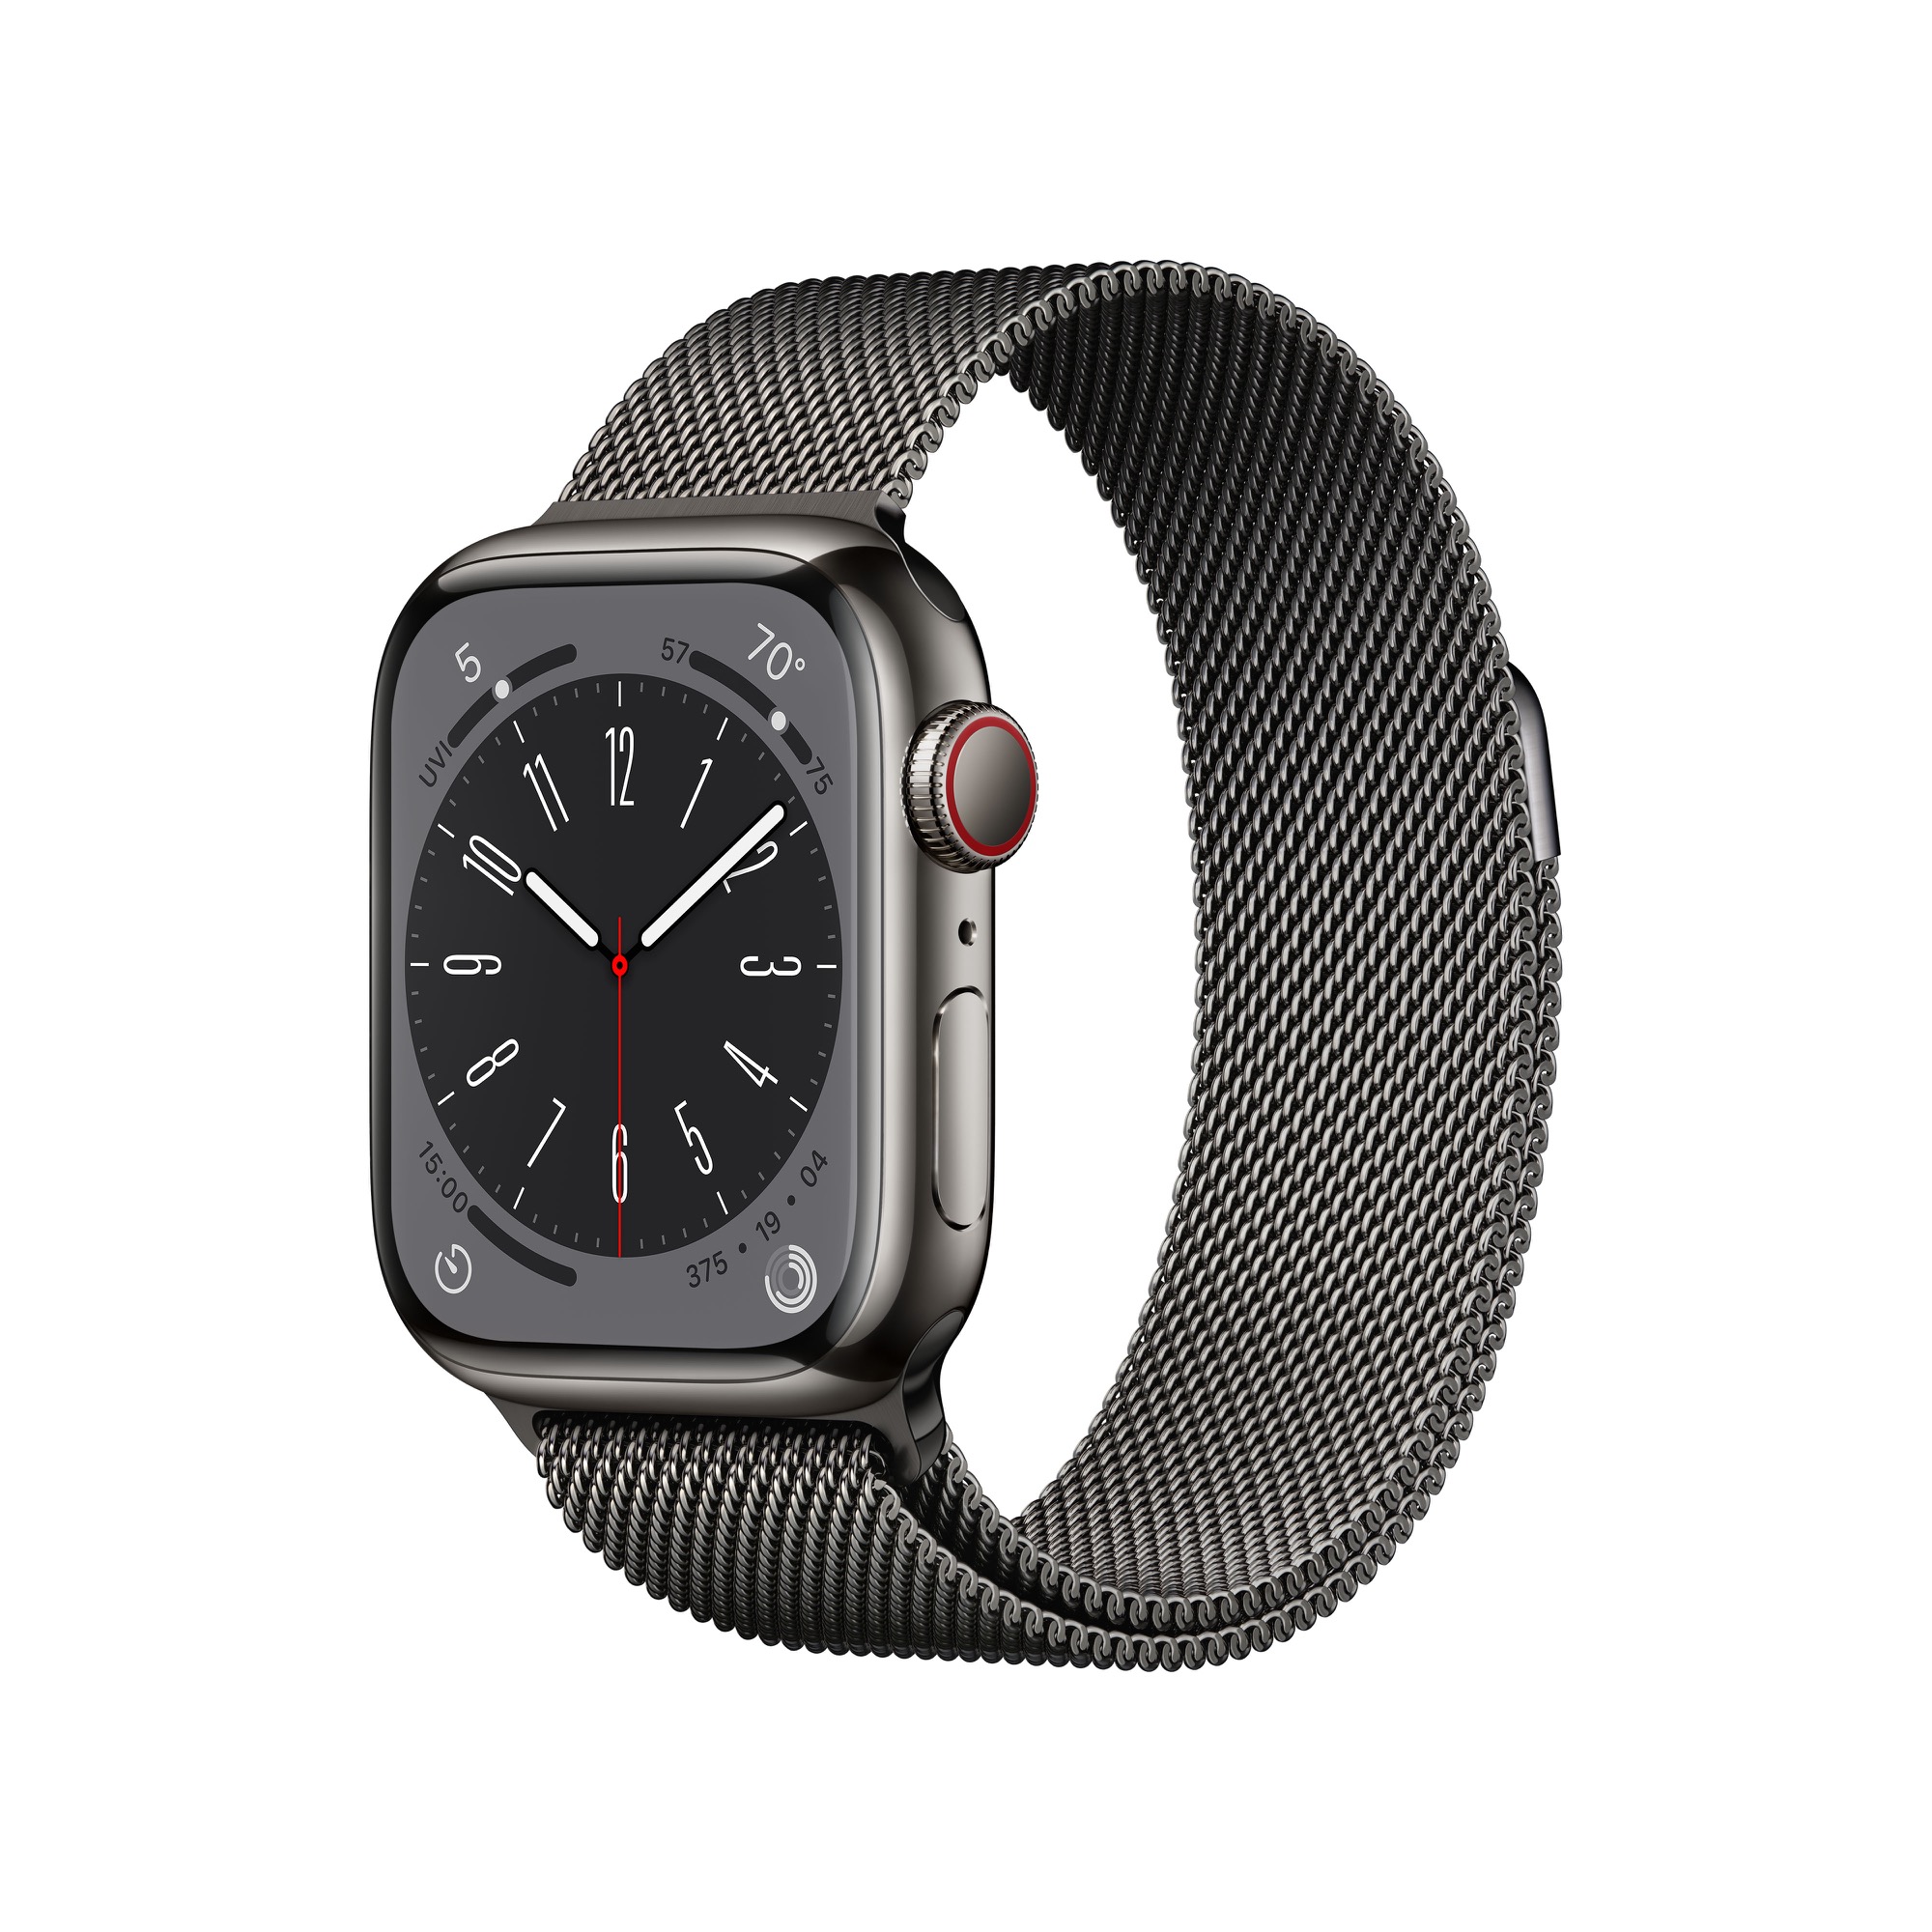 APPLE Watch Series 8 Cellular Graphite Stainless Steel Case with Graphite Milanese Loop